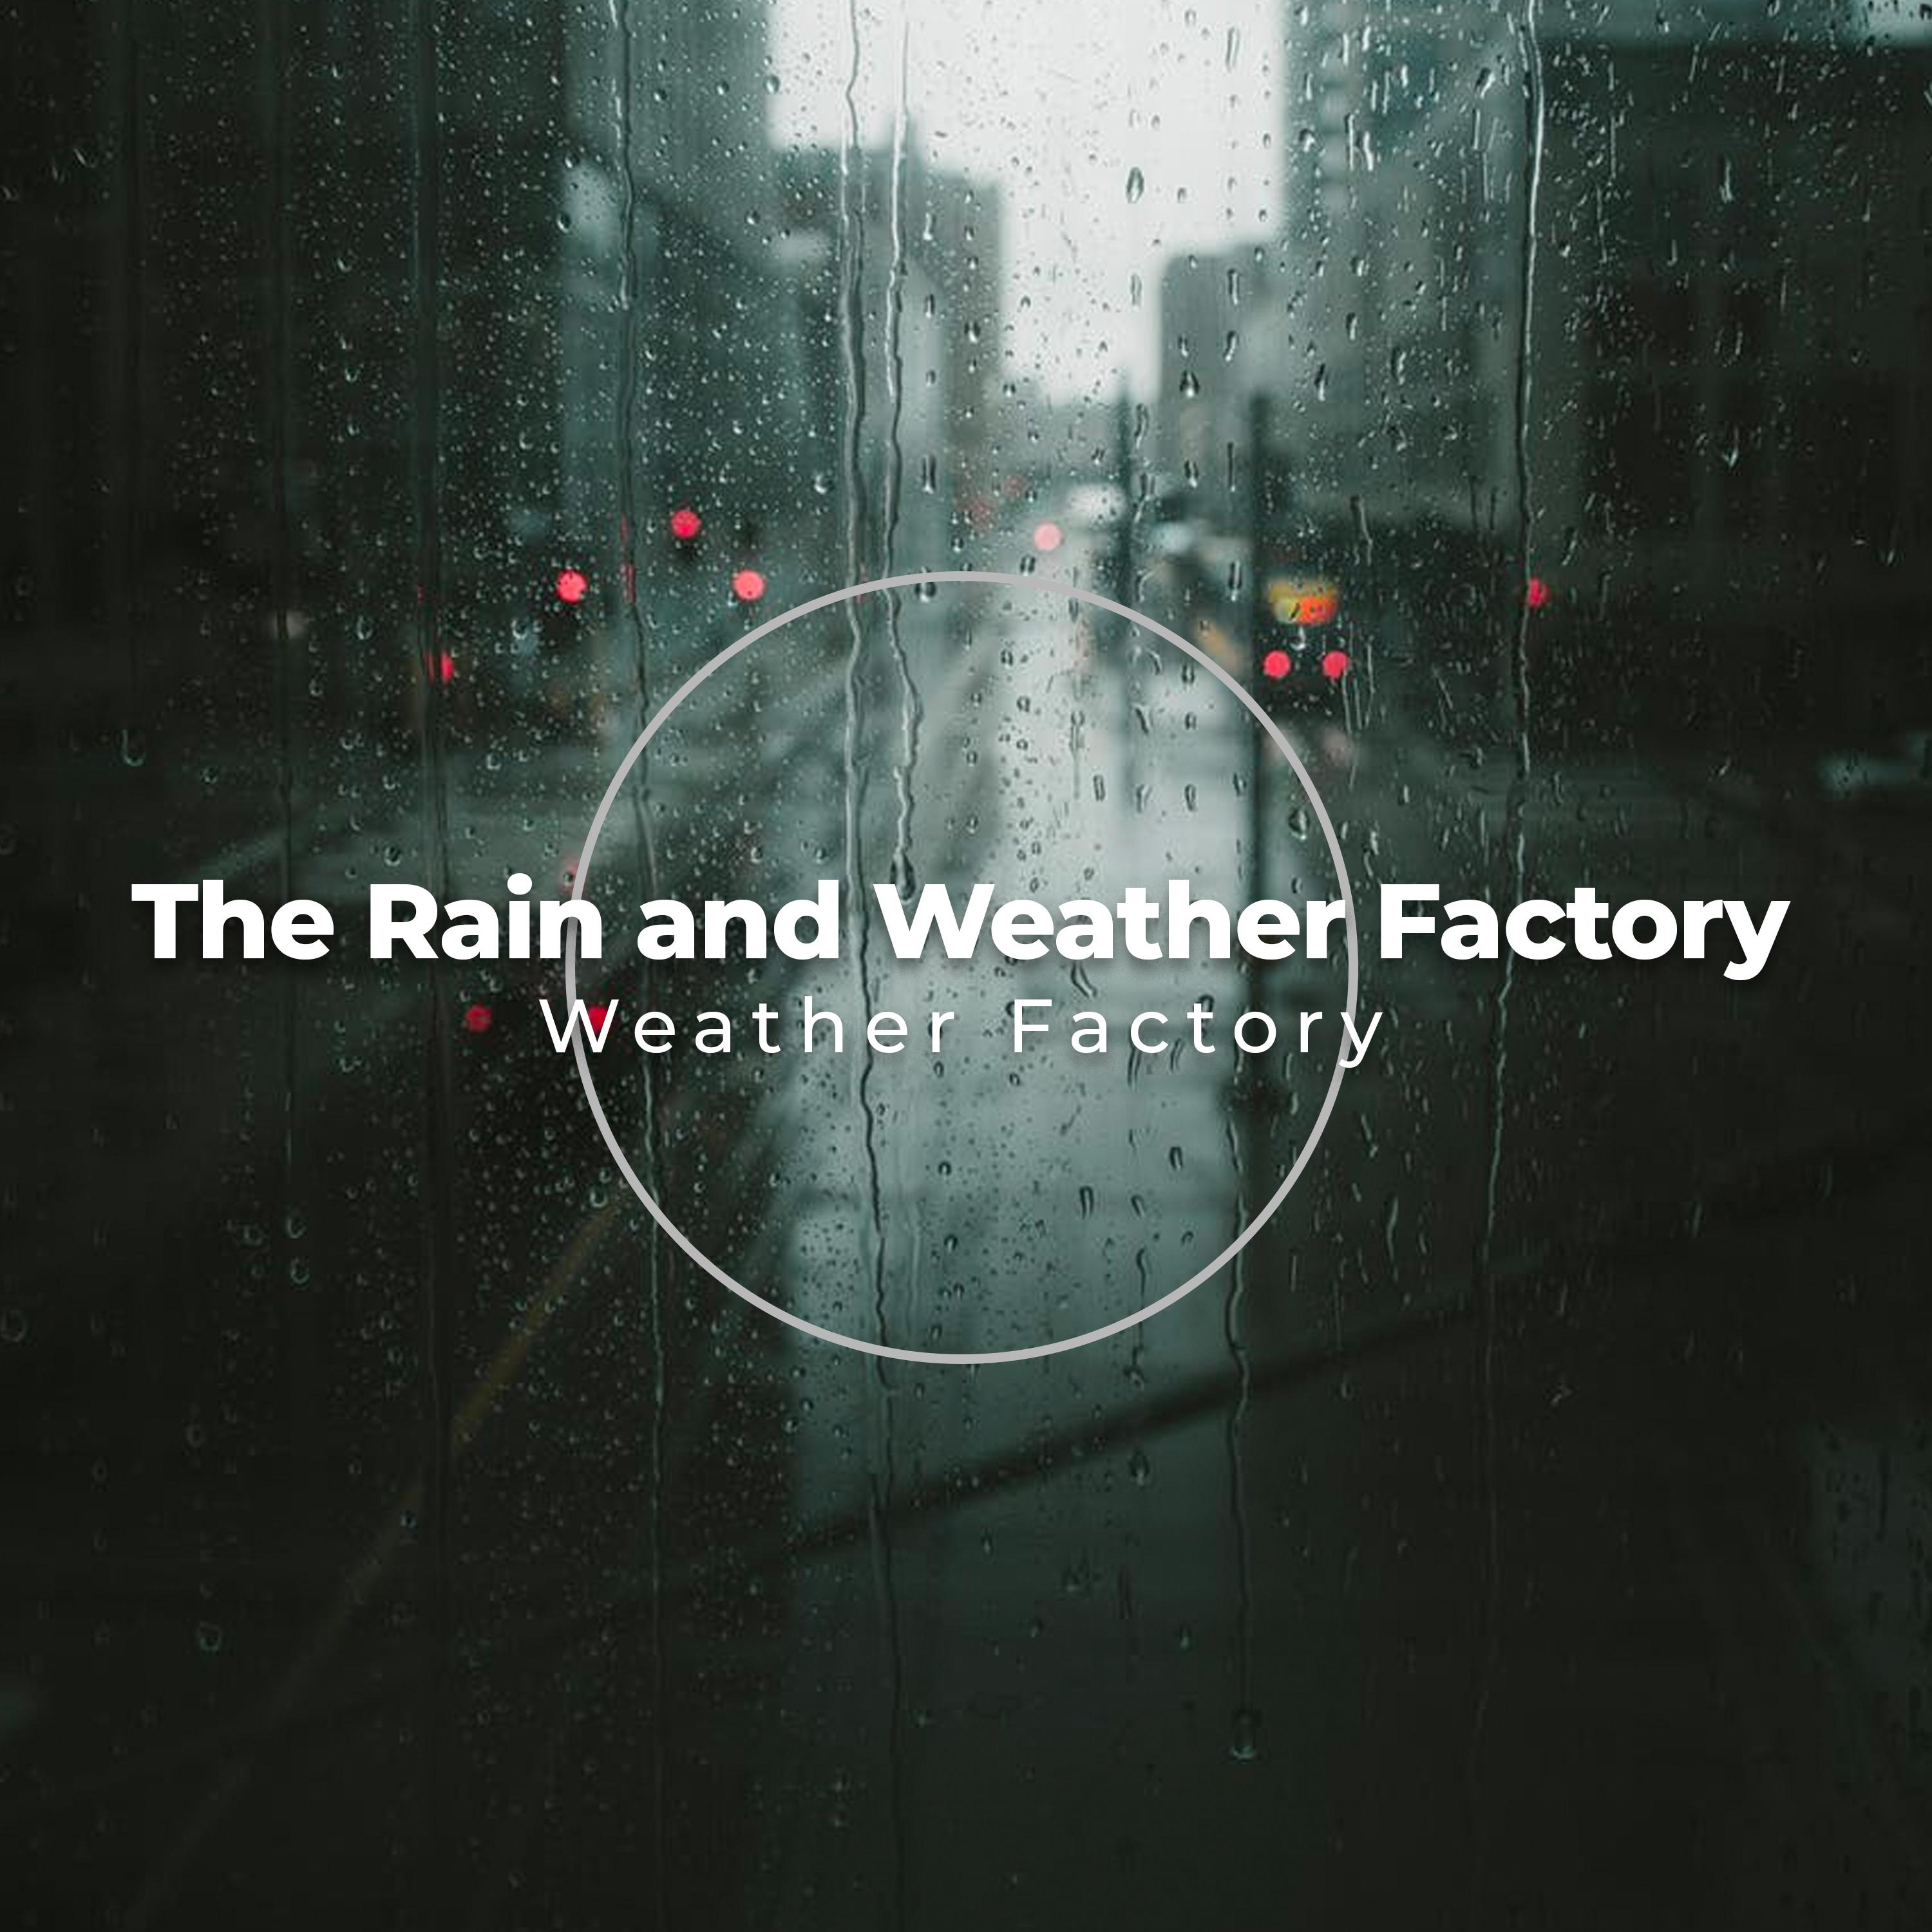 The Rain and Weather Factory